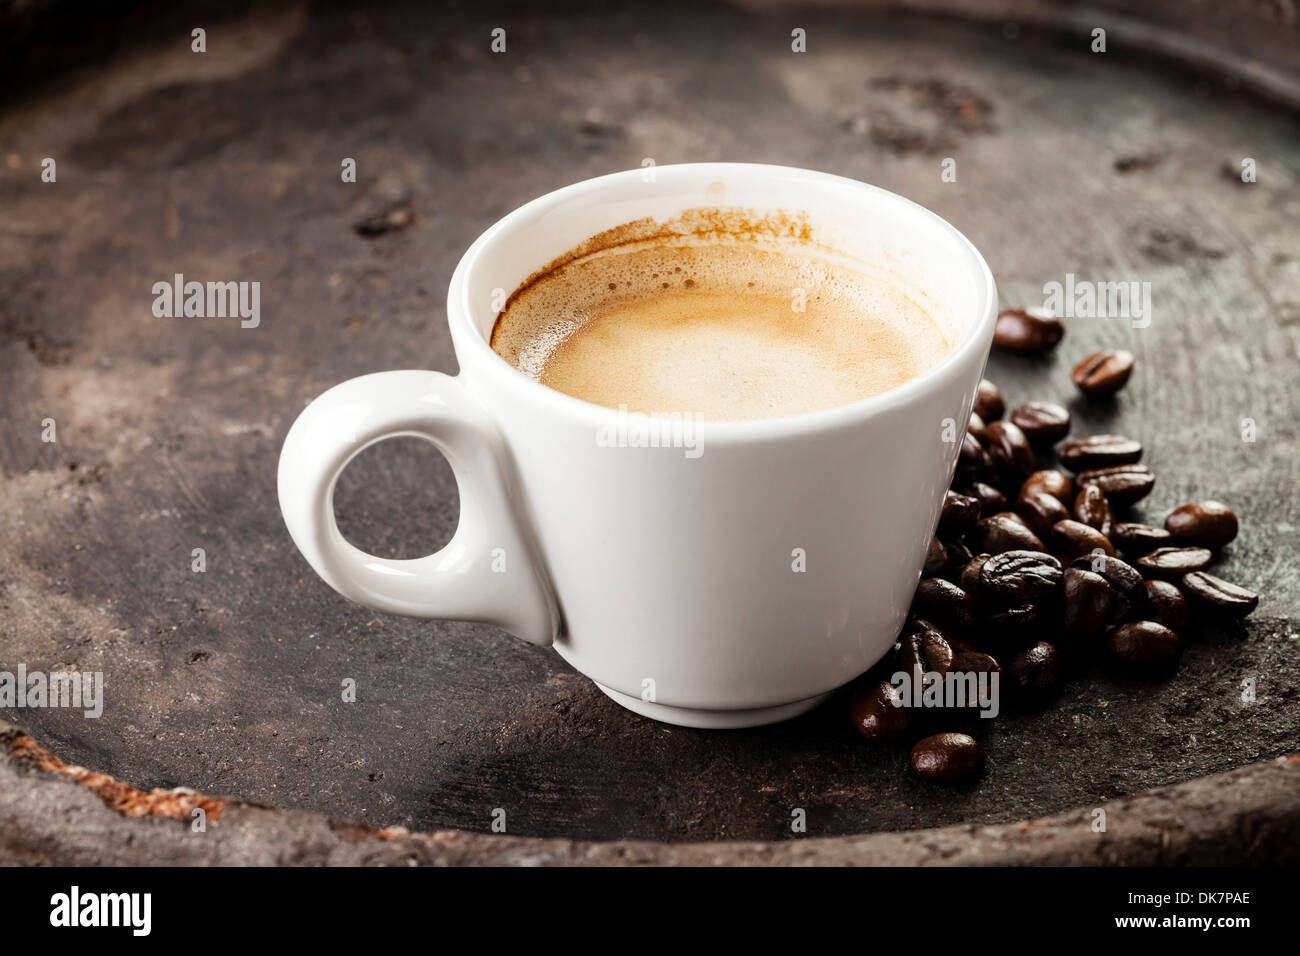 Coffee cup with coffee beans on dark background Stock Photo